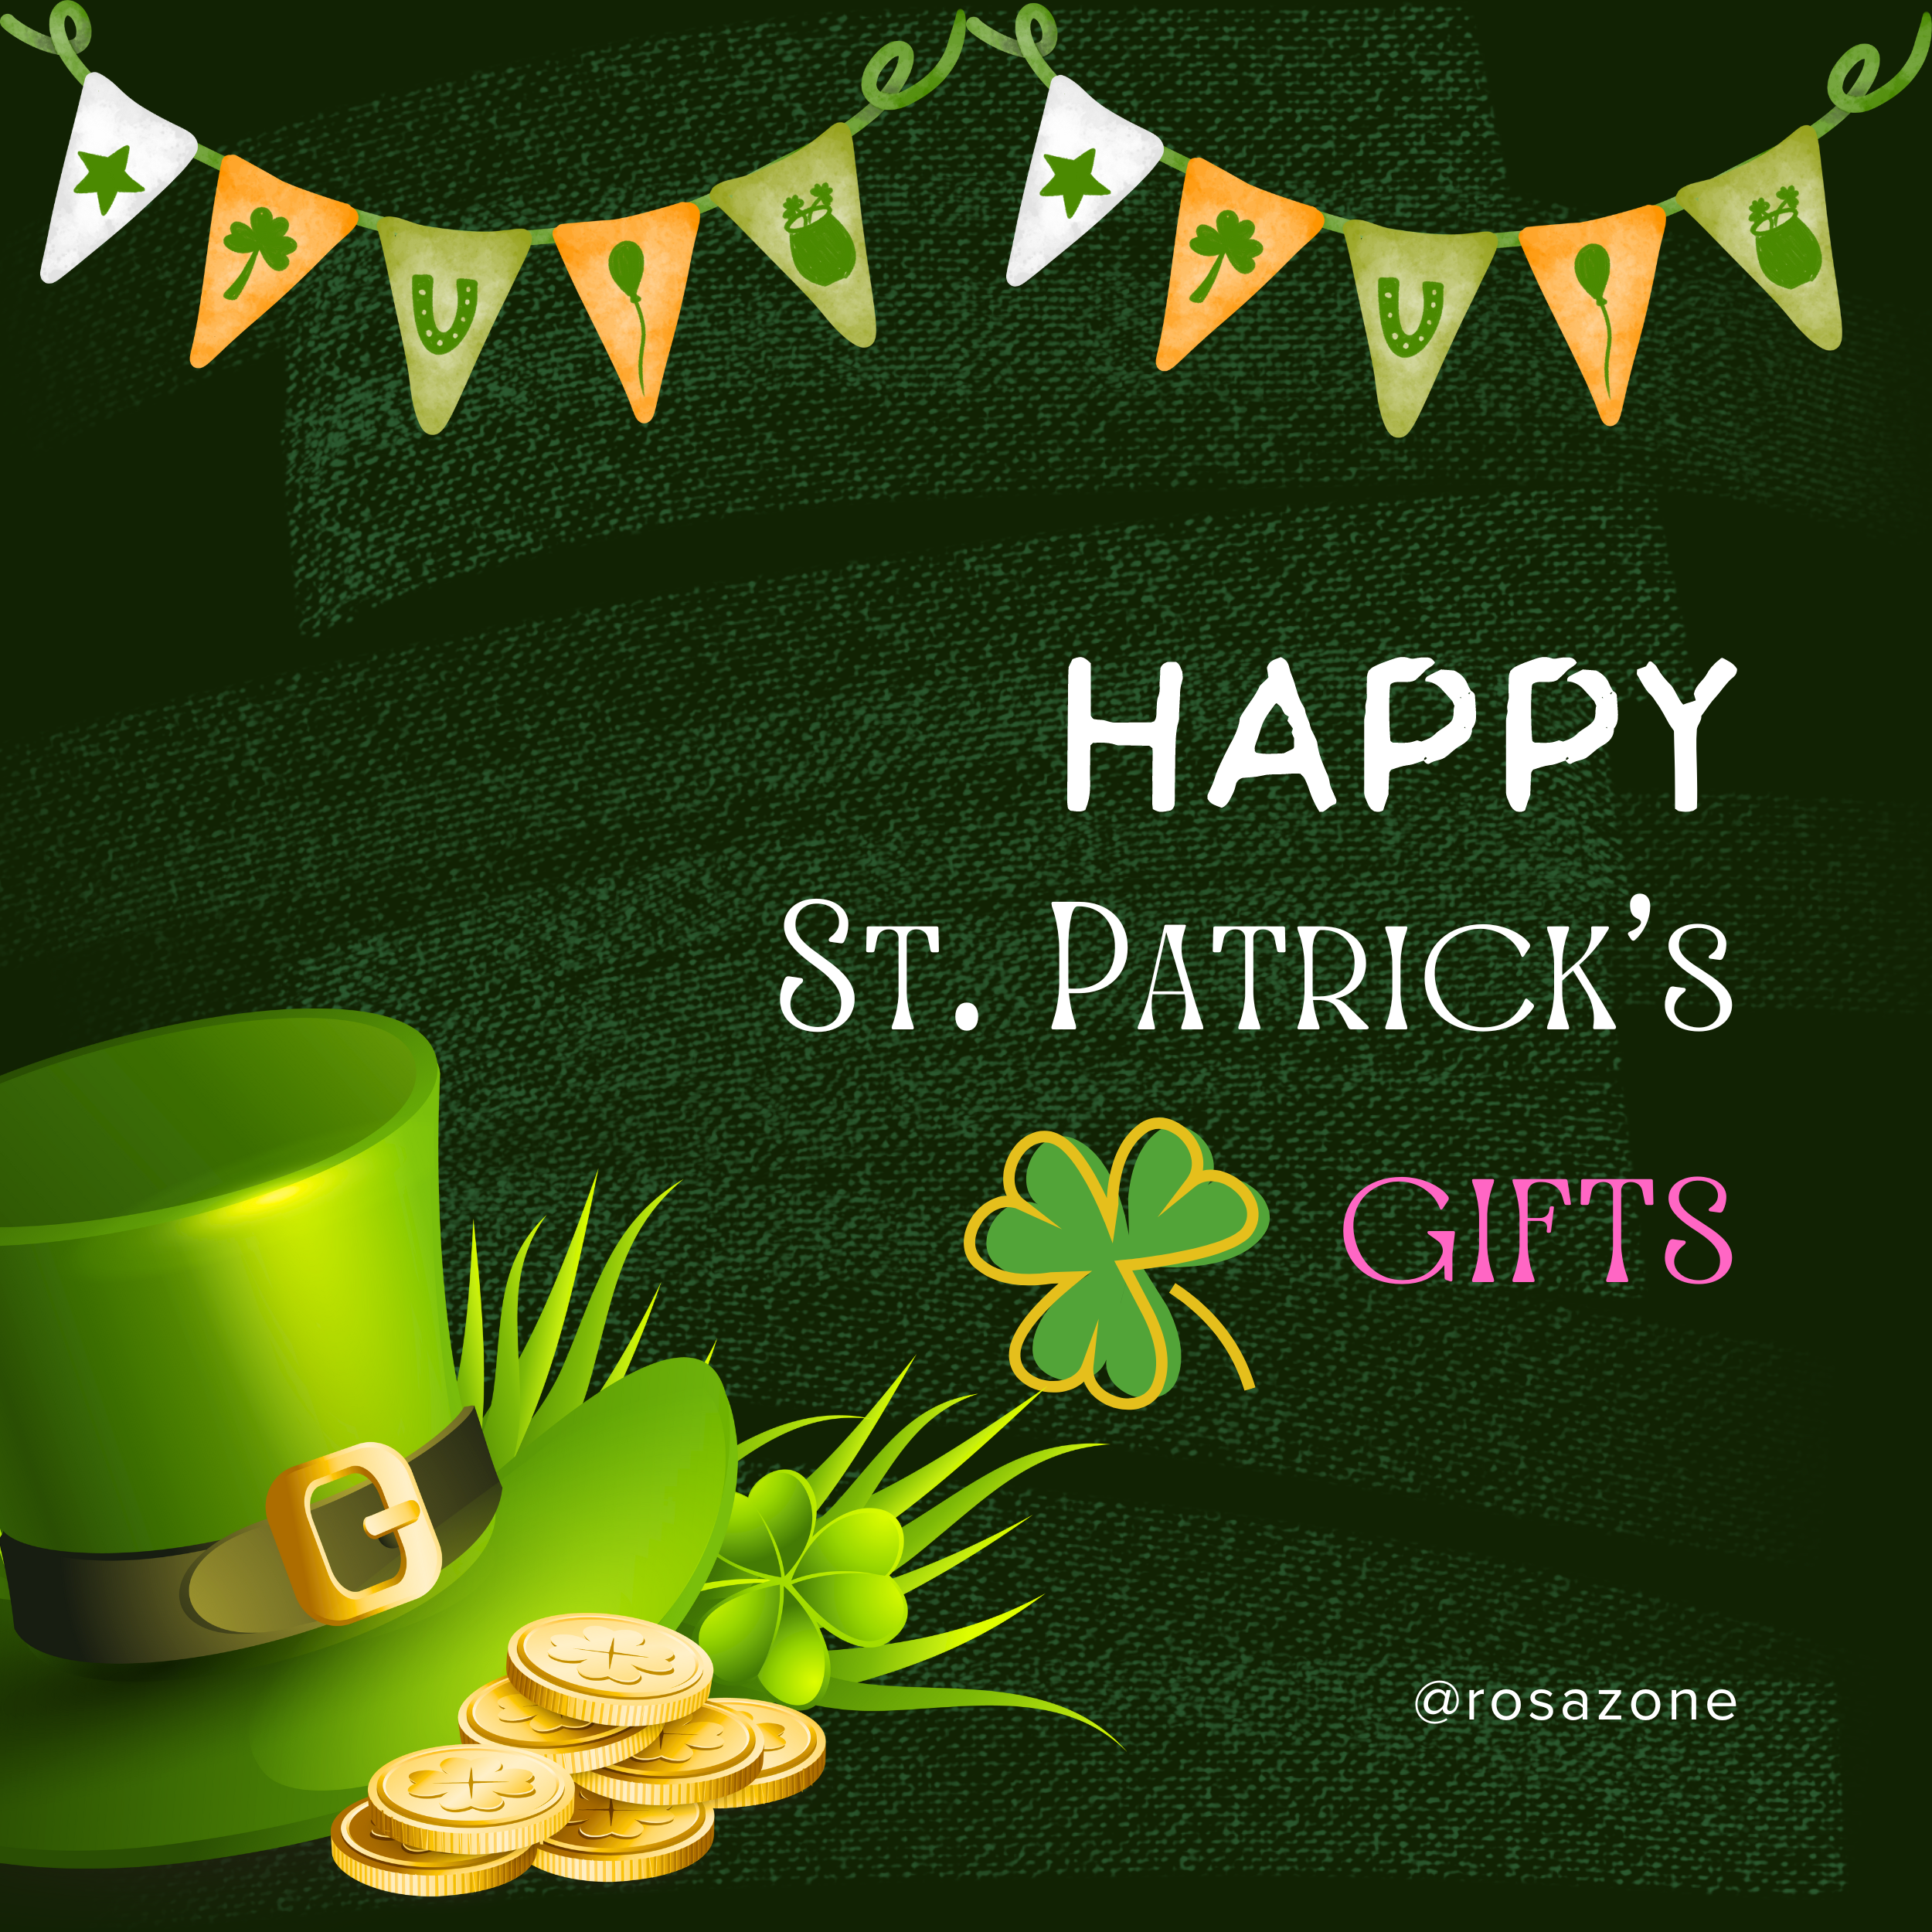 10 Top Gifts For St Patrick’s Day